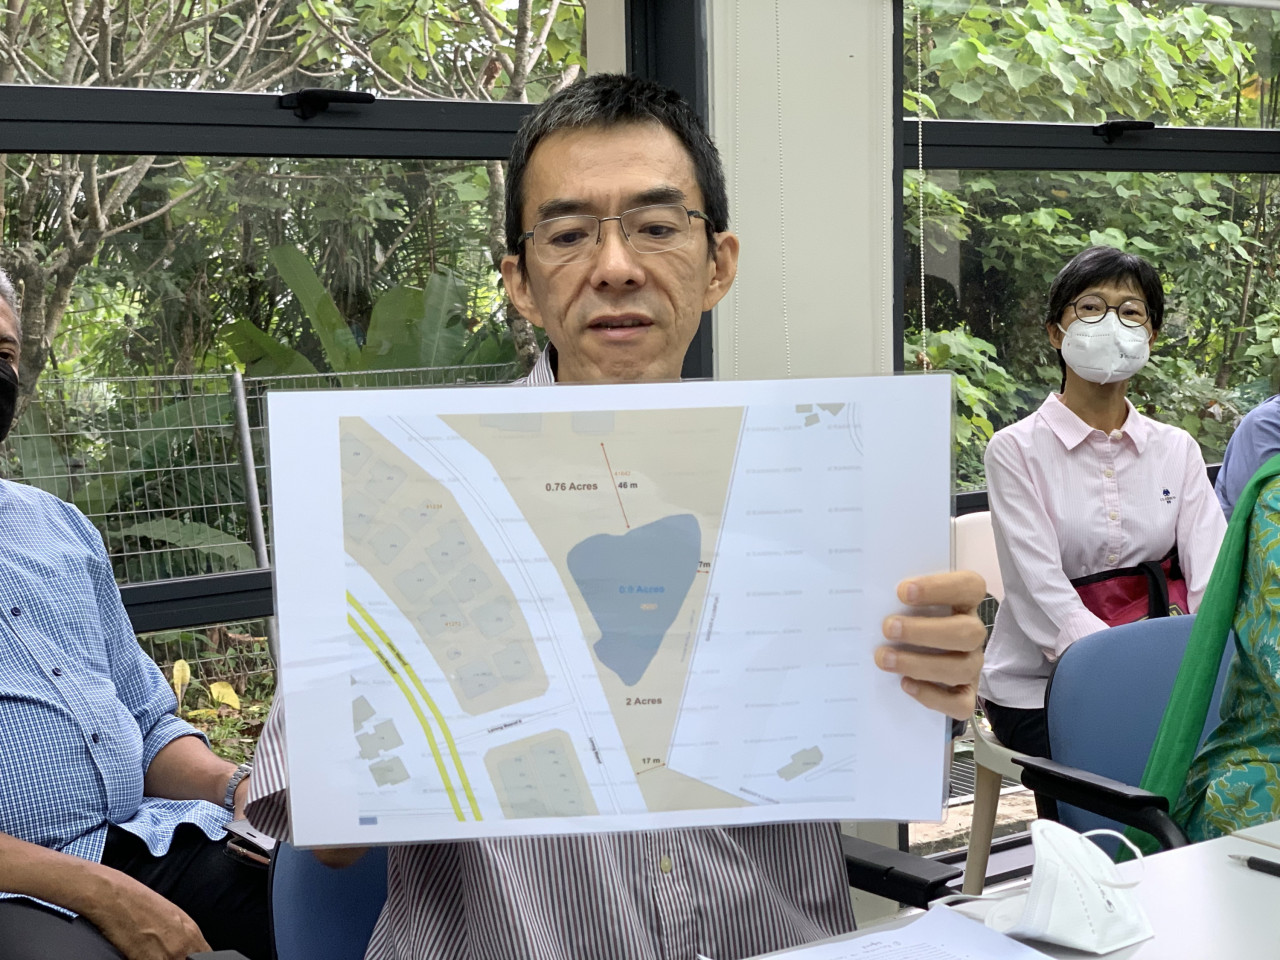 Bukit Bandaraya Residents’ Association president Charles Tan explains to the media on the lands that will be affected following the conditional approval for development near the Bangsar water retention pond. – AMAR SHAH MOHSEN/The Vibes pic, September 9, 2022